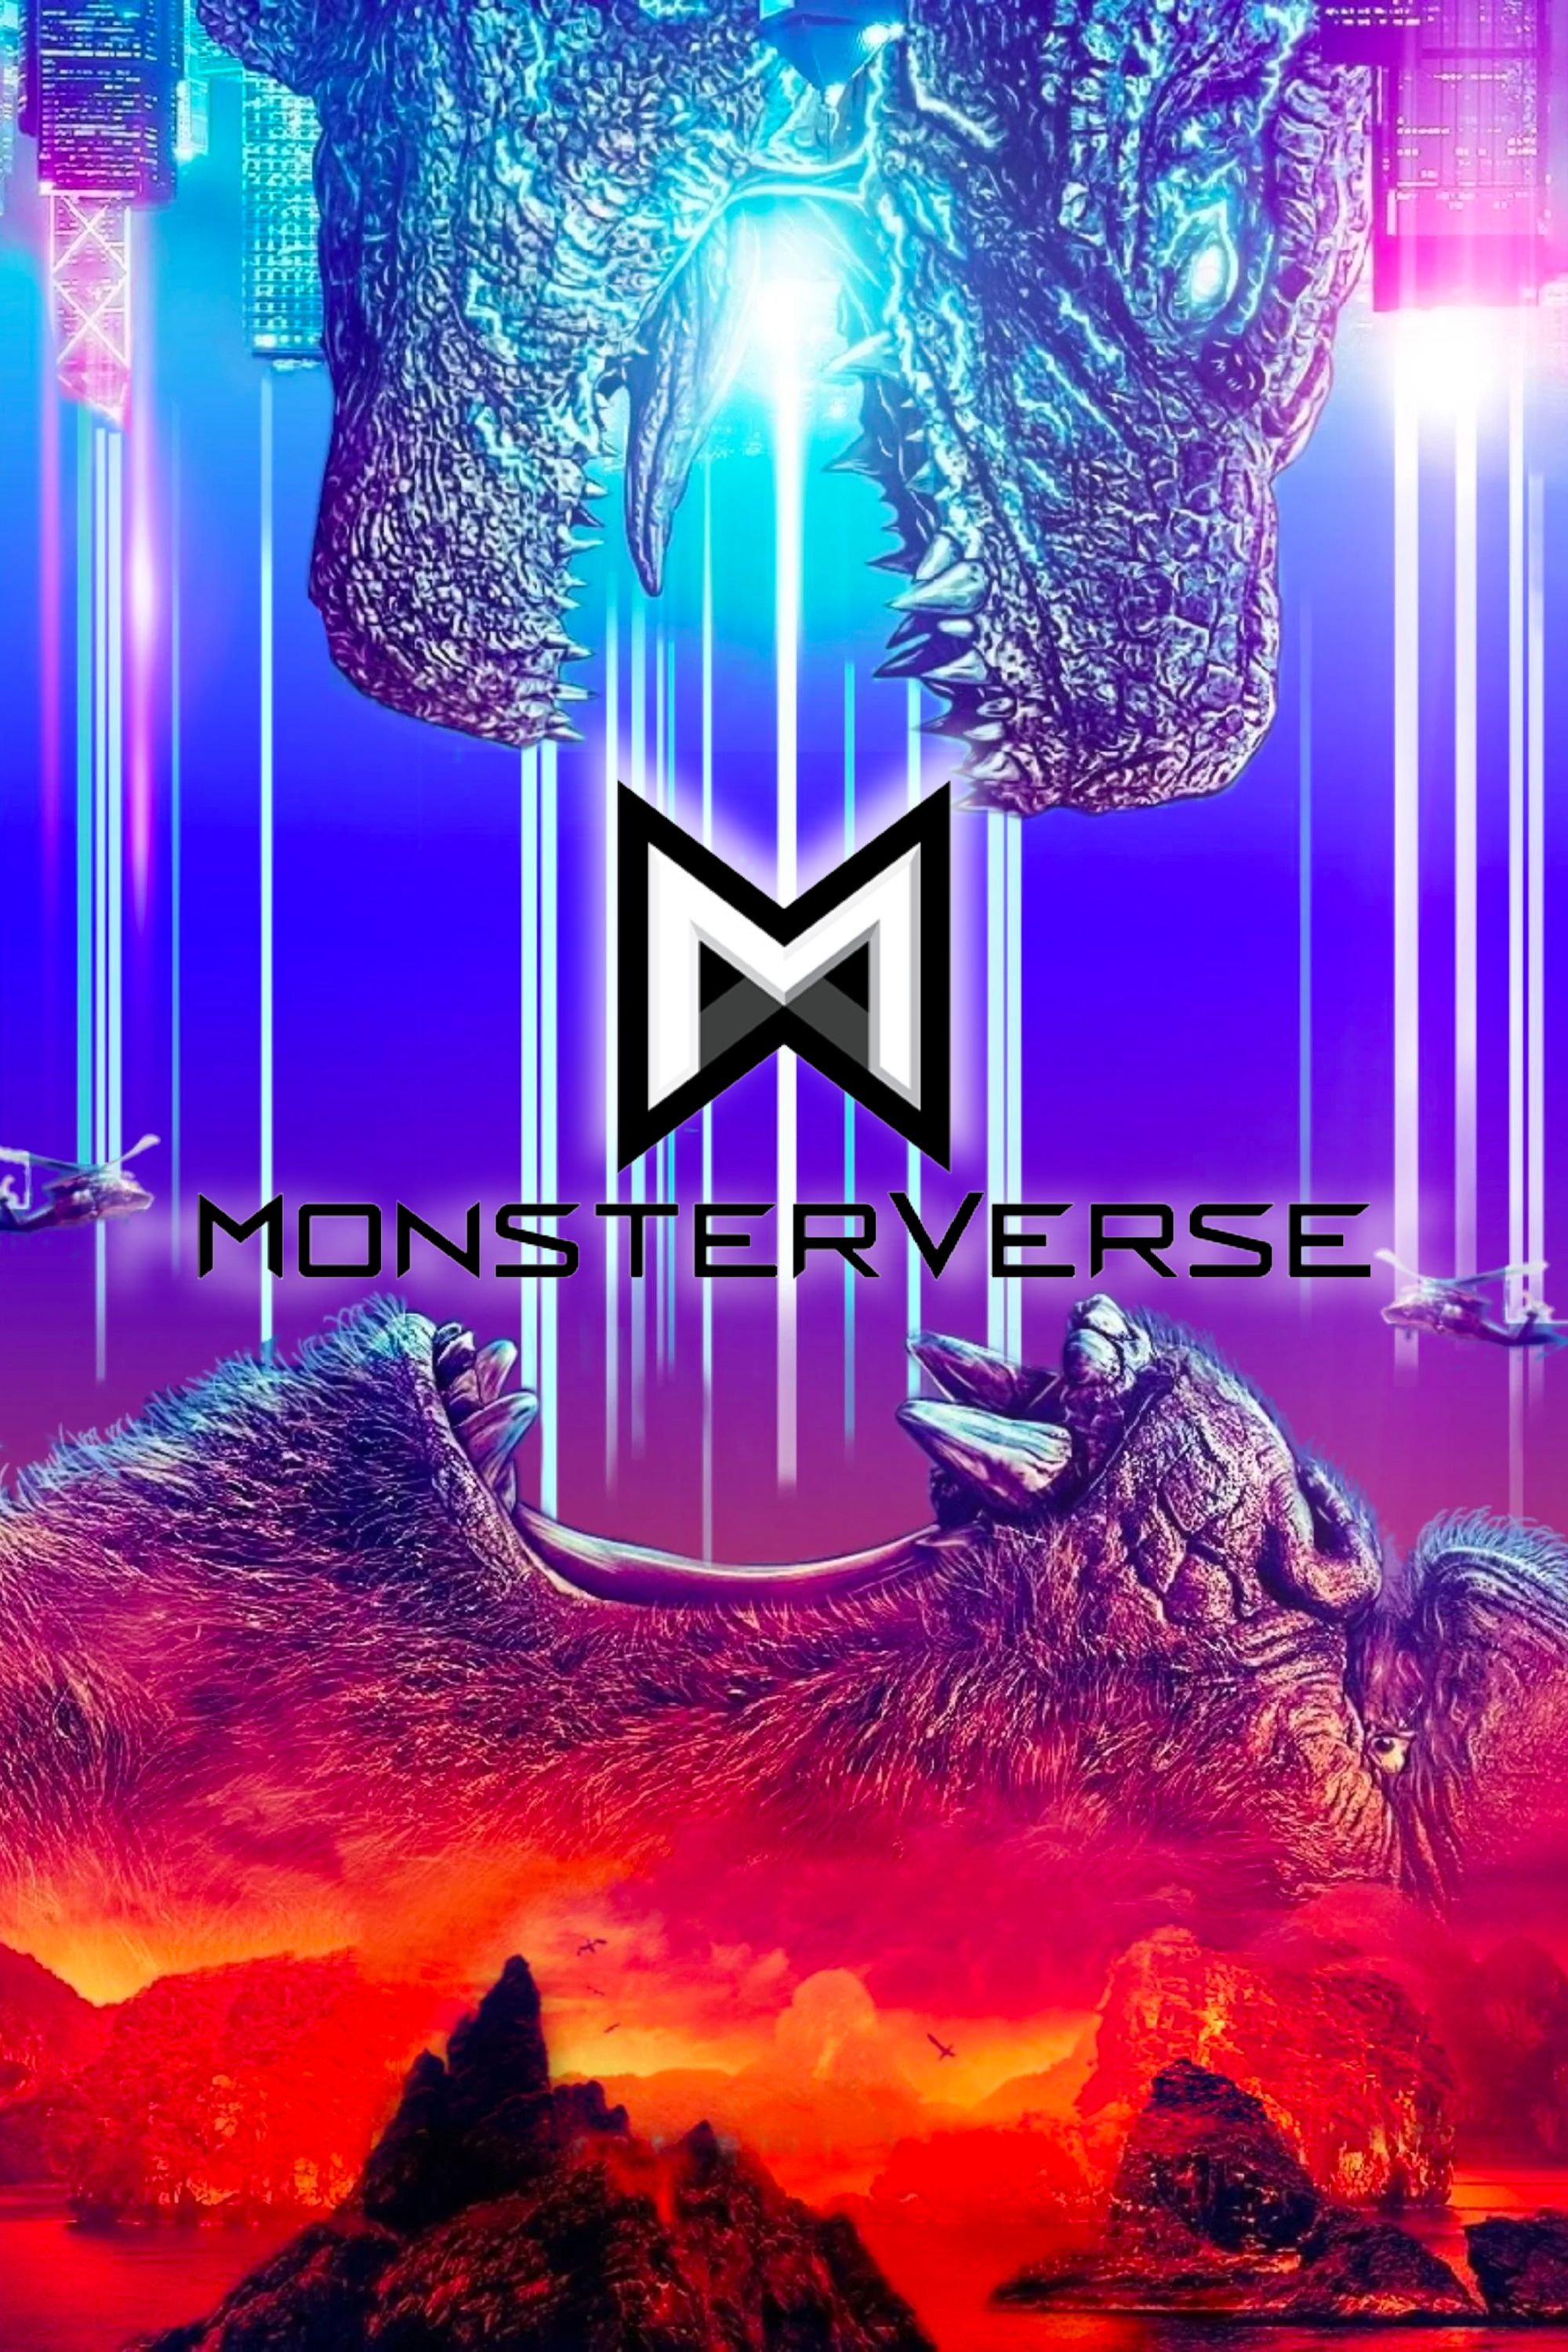 Godzilla and Kong in Monsterverse Franchise Poster